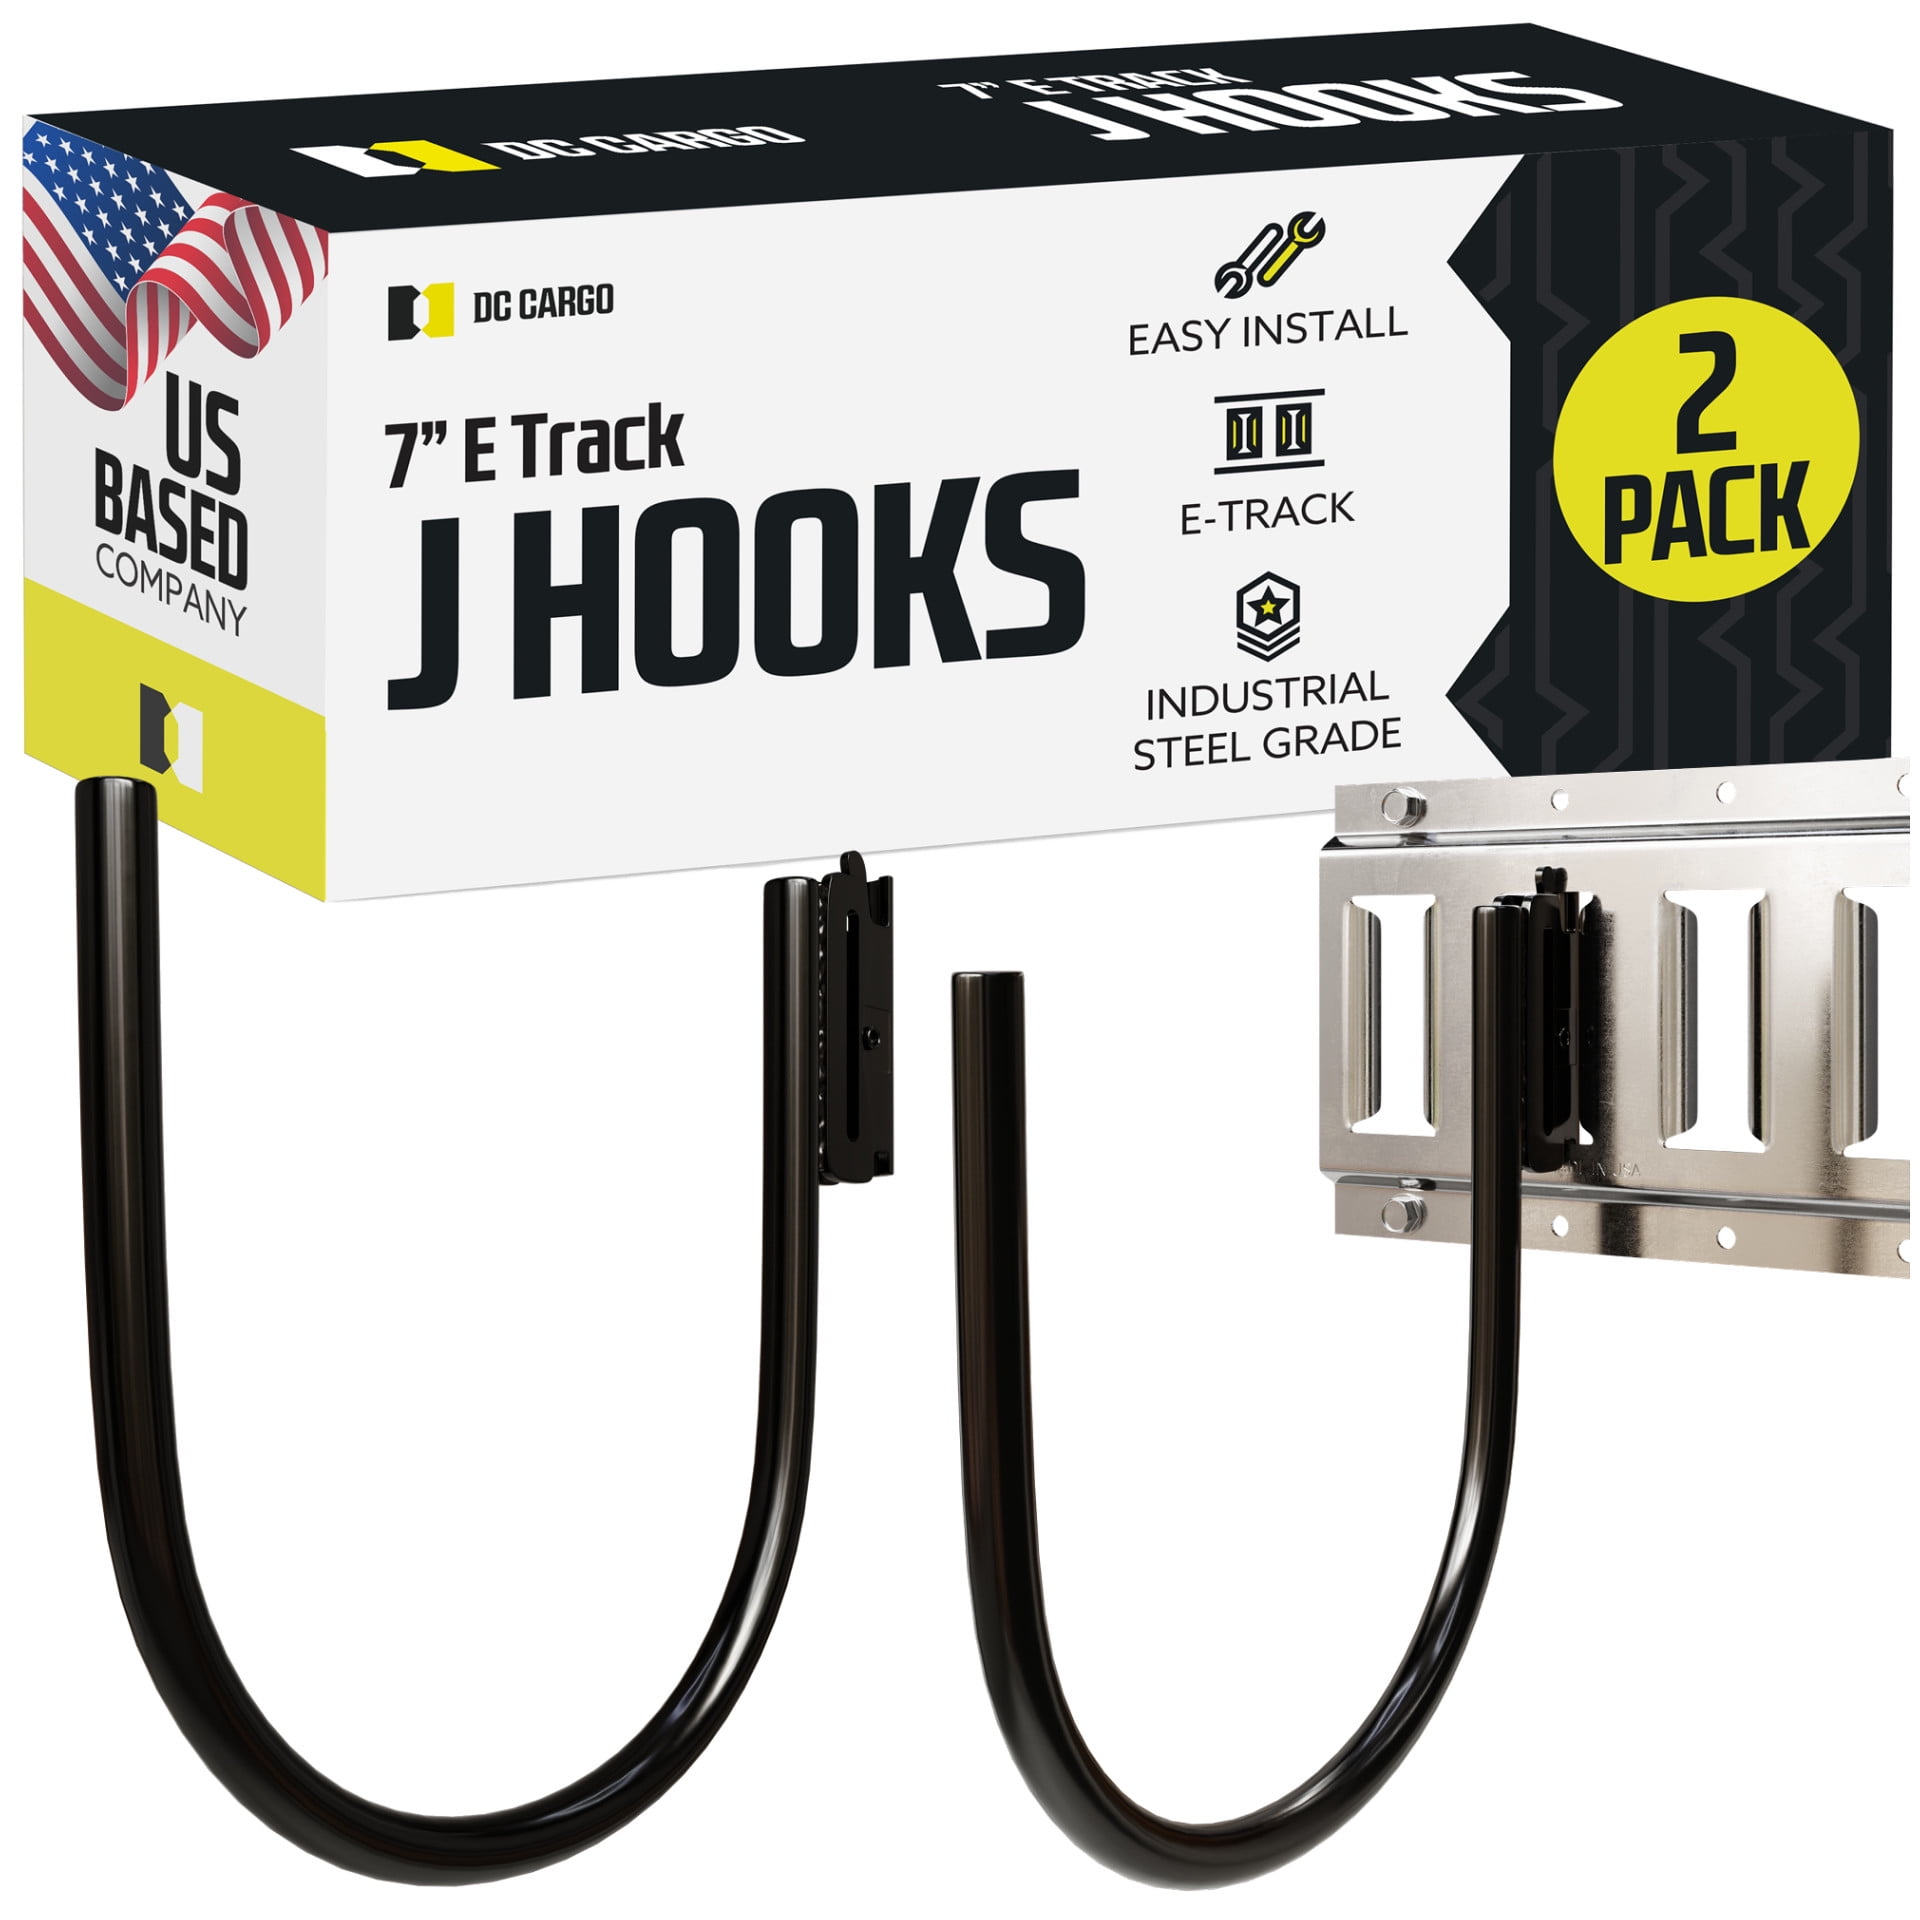 8 Pieces E Track J Hooks Heavy Duty J Hook Fitting with Spring Fitting  Attachments for Enclosed Trailer, Cargo Van and Semi-Trucks Trailer (Black)